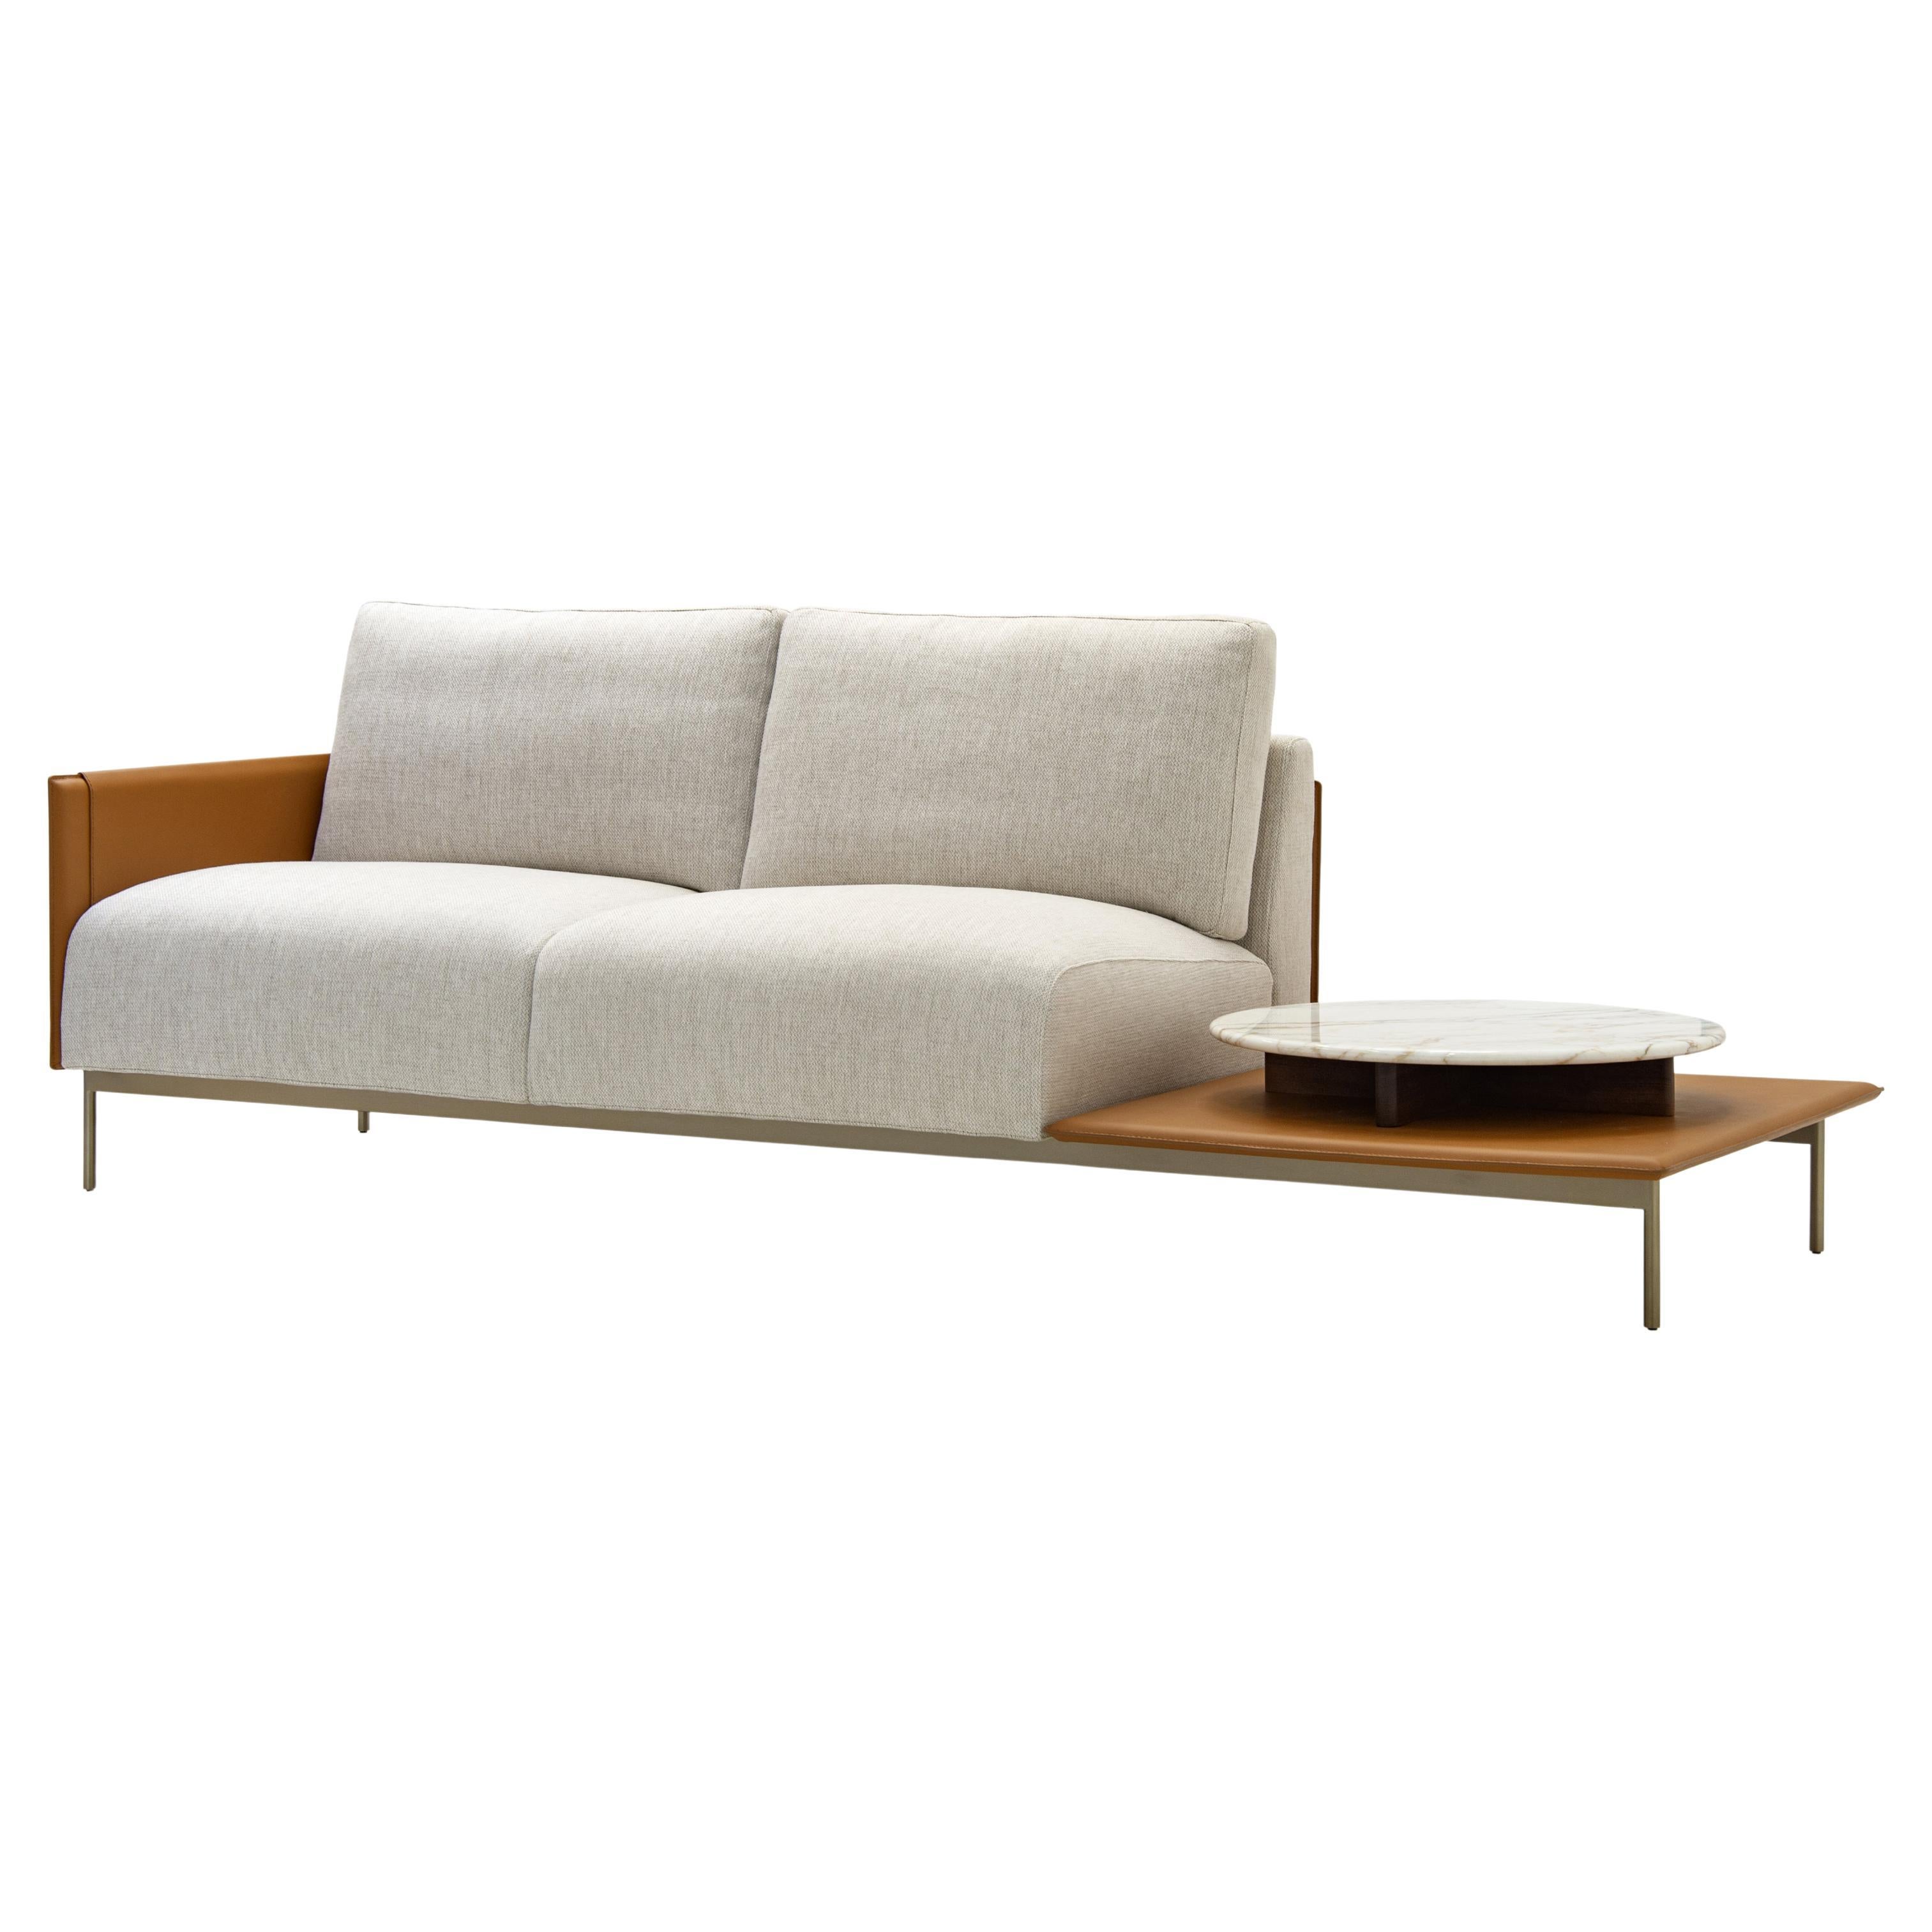 Design Contemporary, Icone Sofa with Tray in Natural Saddle Leather V215/T (canapé avec plateau en cuir sellier naturel)